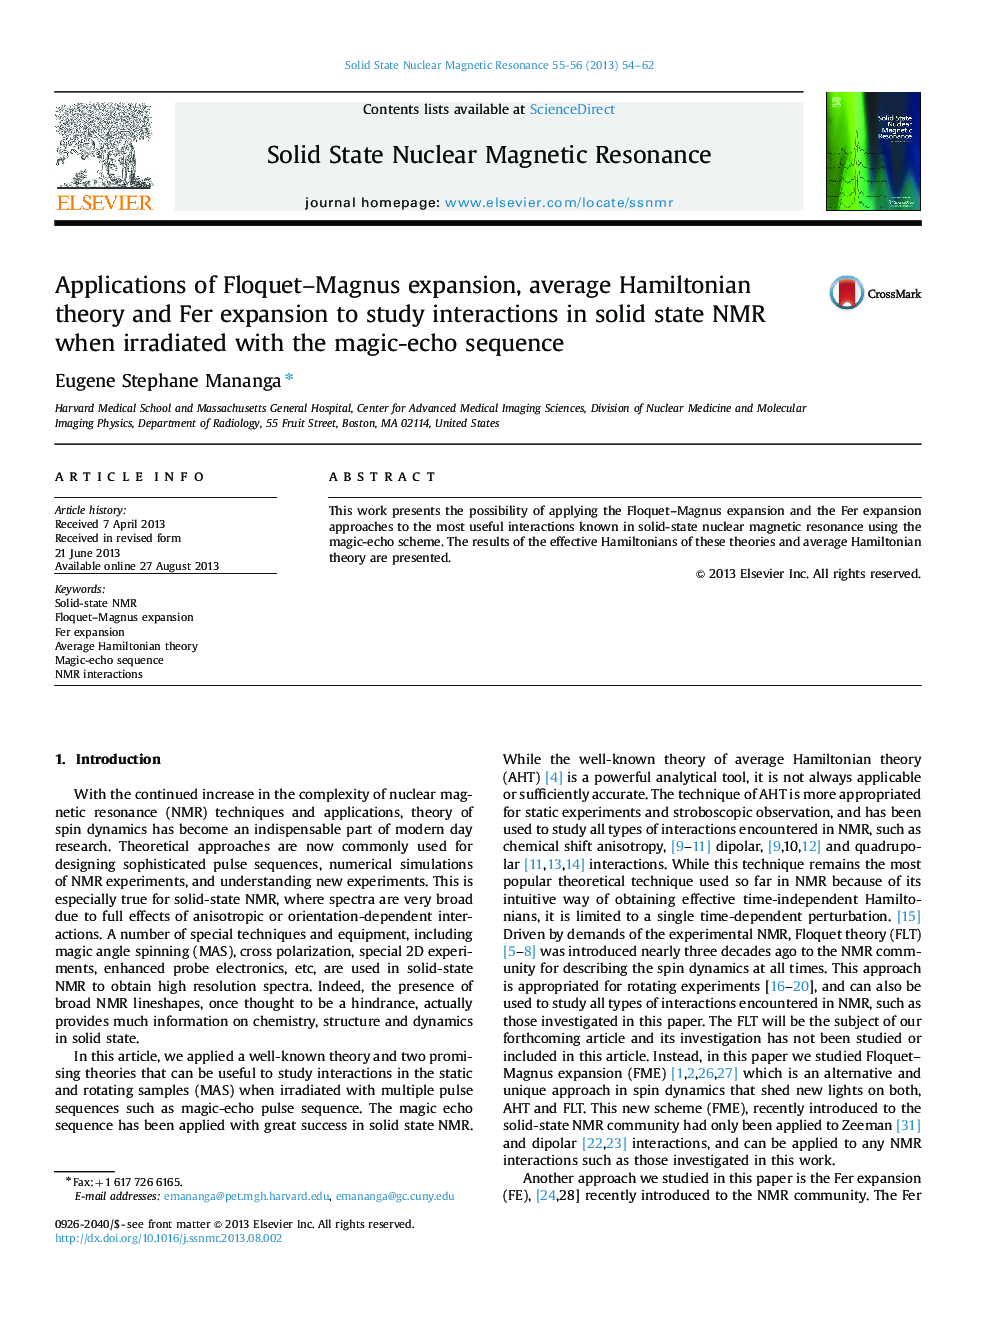 Applications of Floquet-Magnus expansion, average Hamiltonian theory and Fer expansion to study interactions in solid state NMR when irradiated with the magic-echo sequence